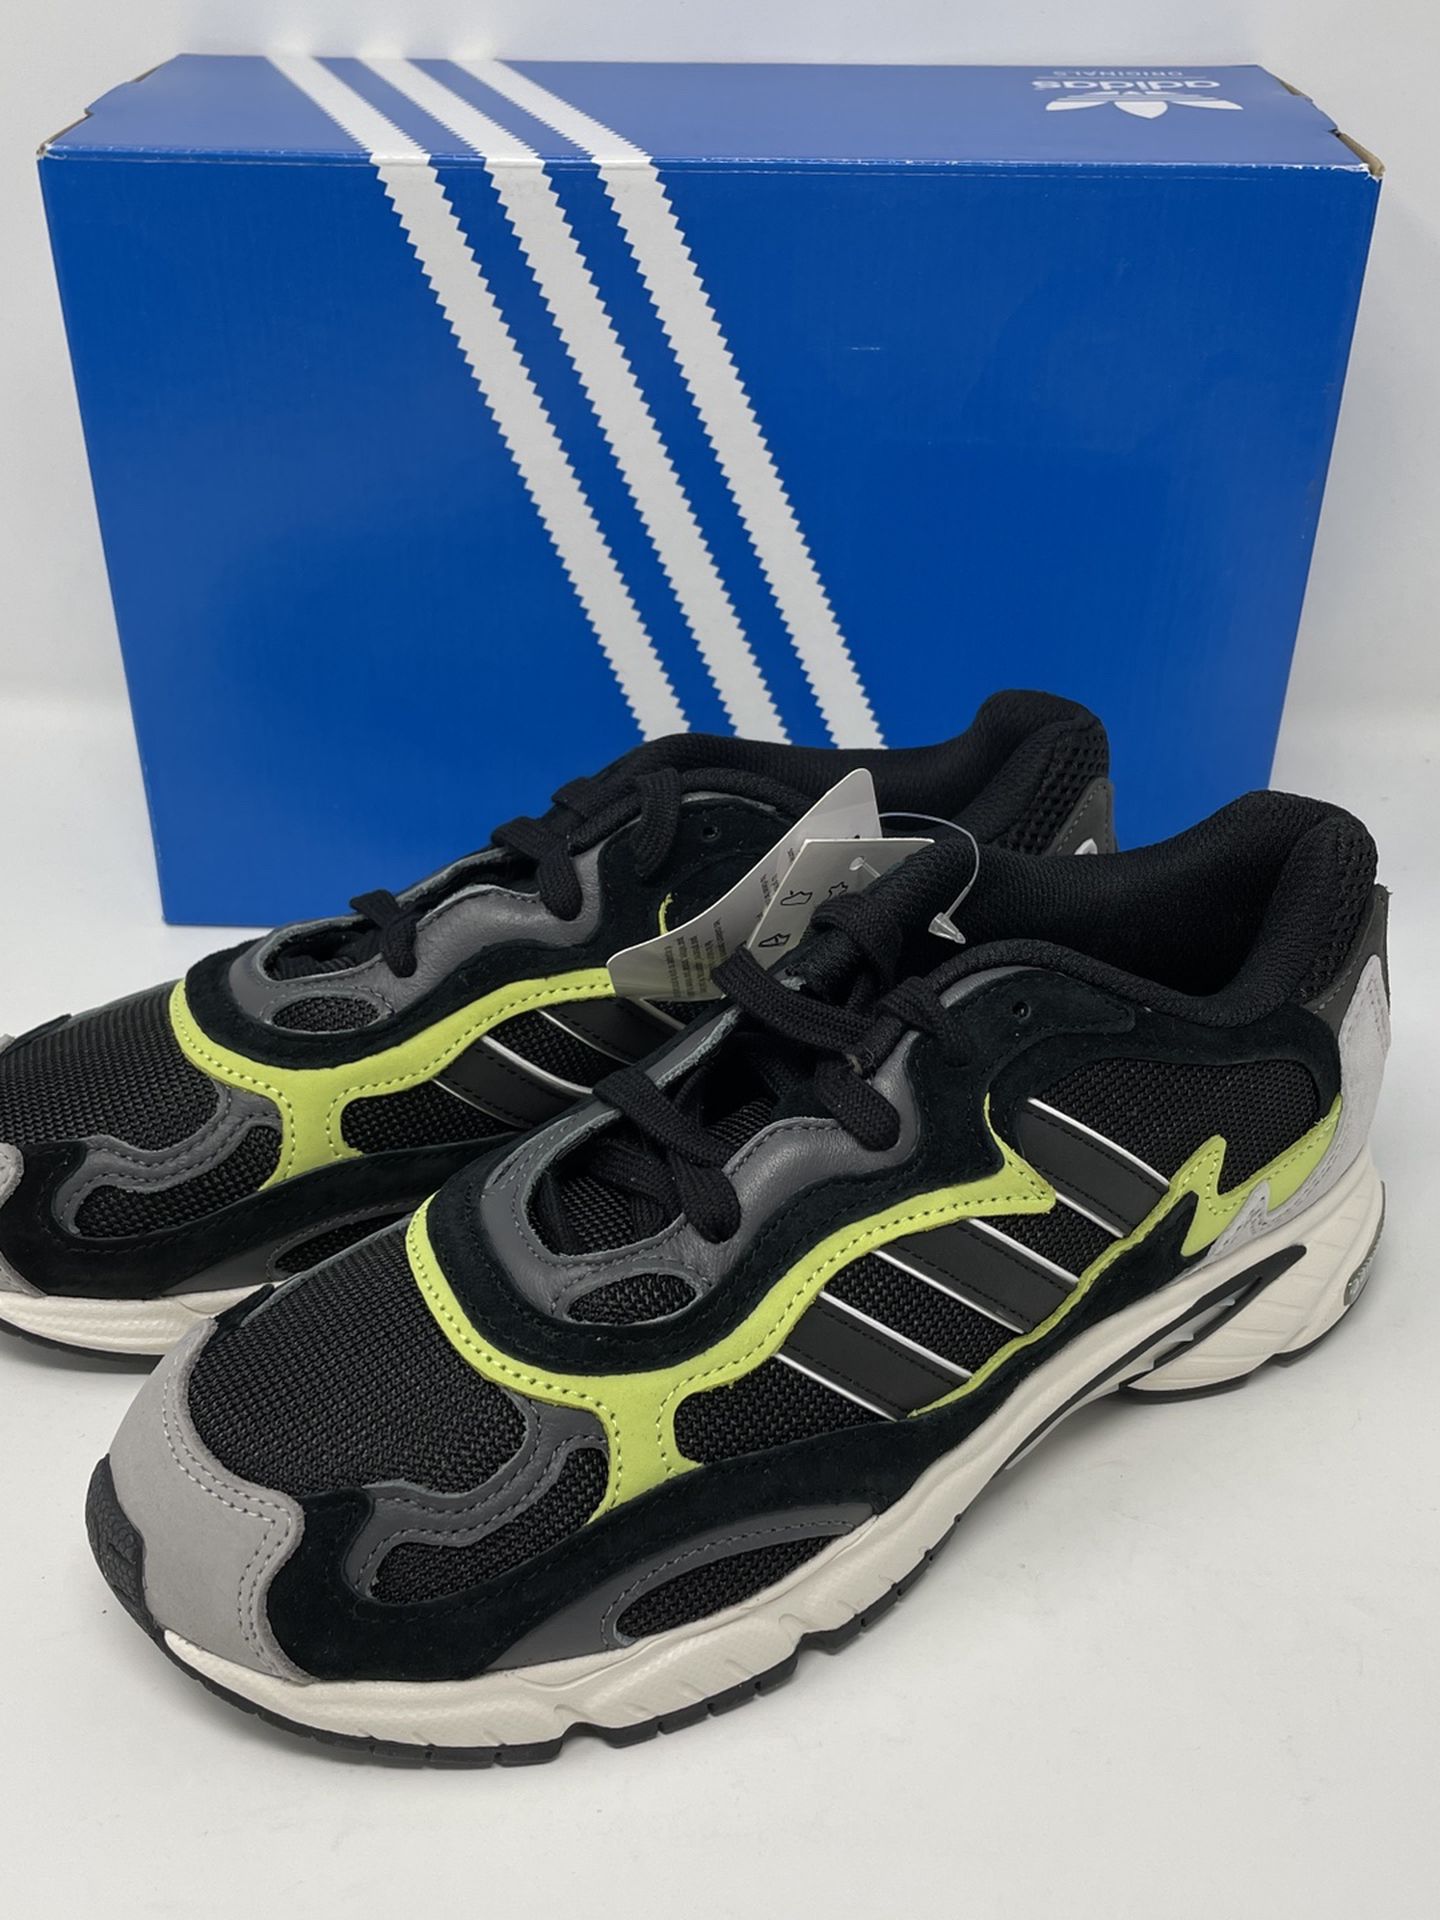 Adidas Temper Core Black White Size 8 F97209 Mens Running Shoes for Sale in San Jose, CA - OfferUp